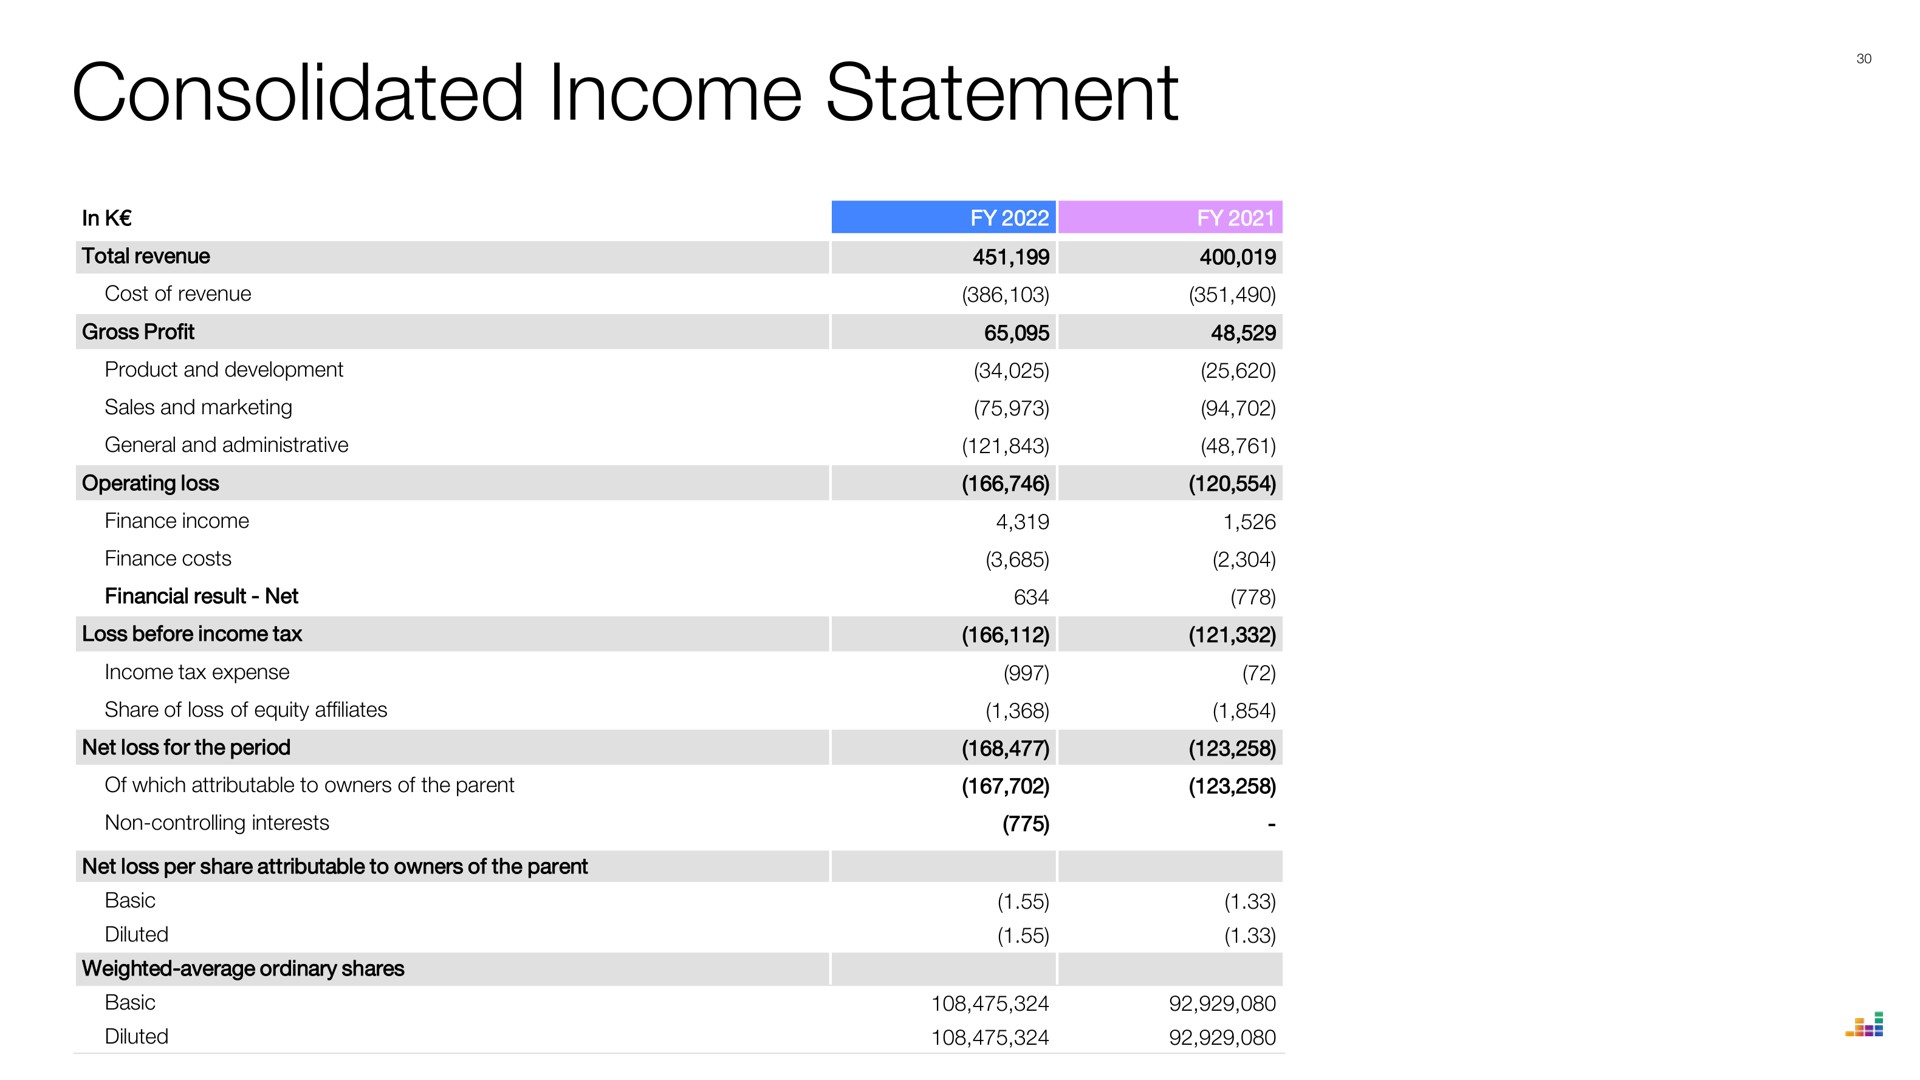 consolidated income statement | Deezer